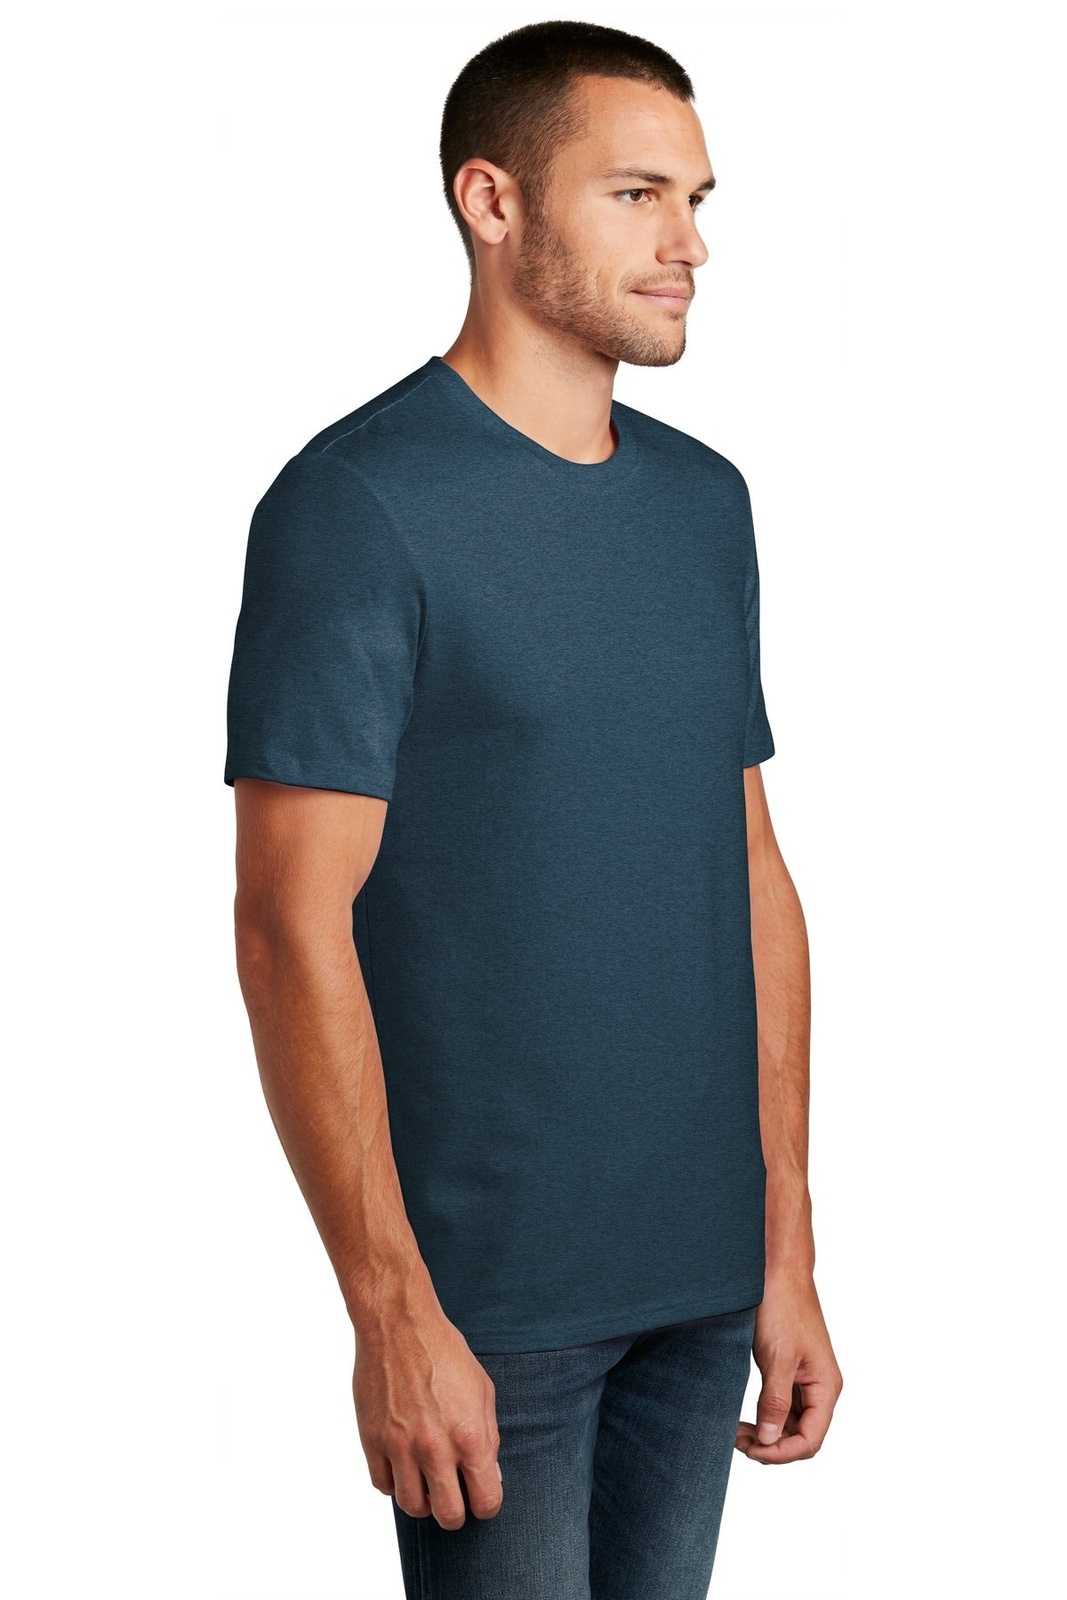 District DT7500 Flex Tee - Heathered Neptune Blue - HIT a Double - 4